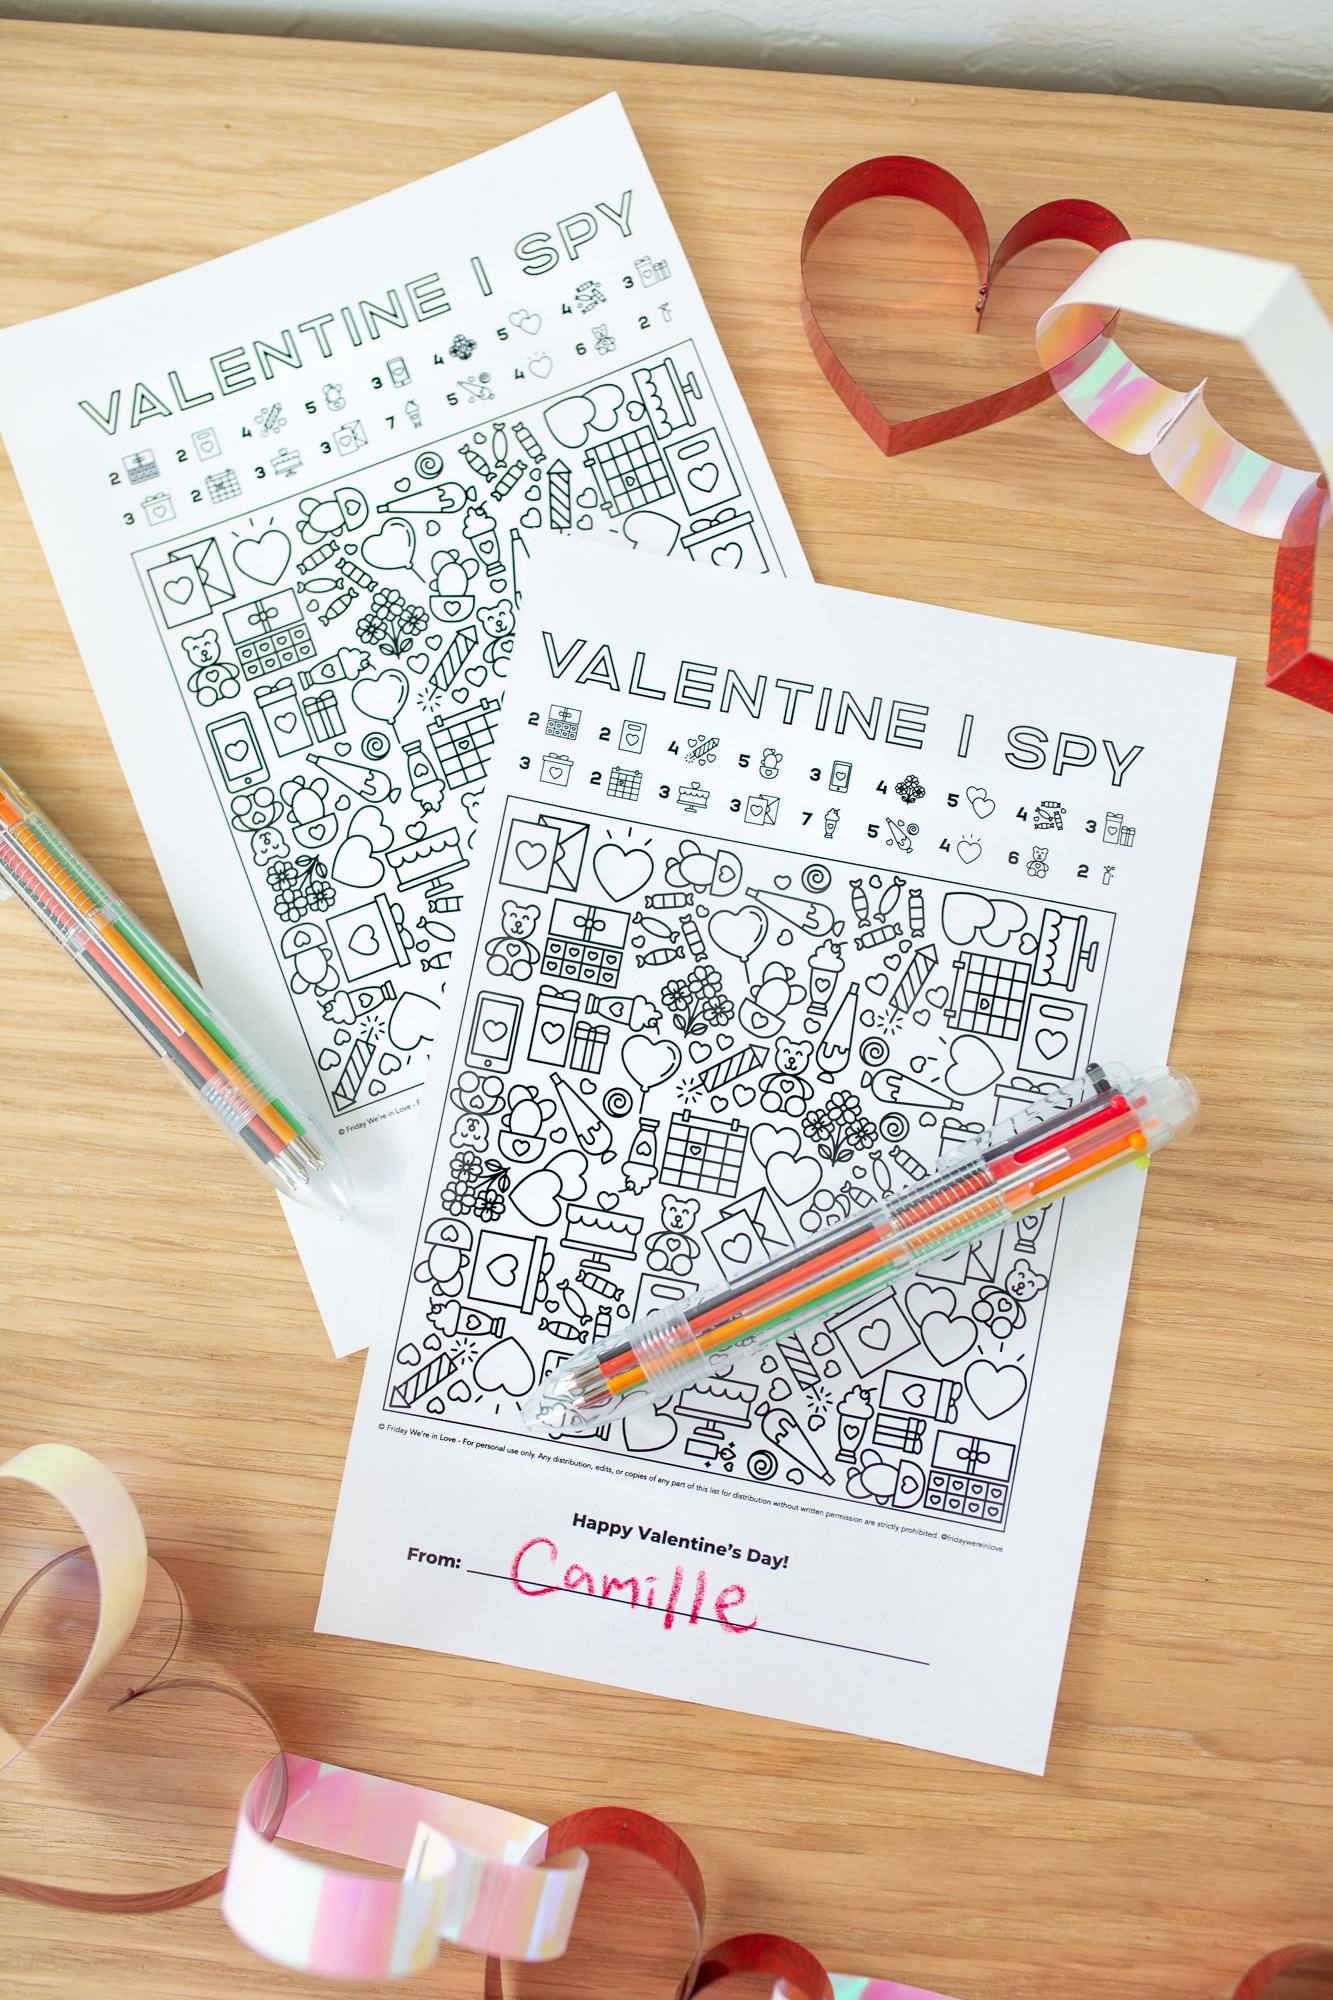 Valentines for Classmates: Valentine Cards You Can Print From Home (or Email) to Friends